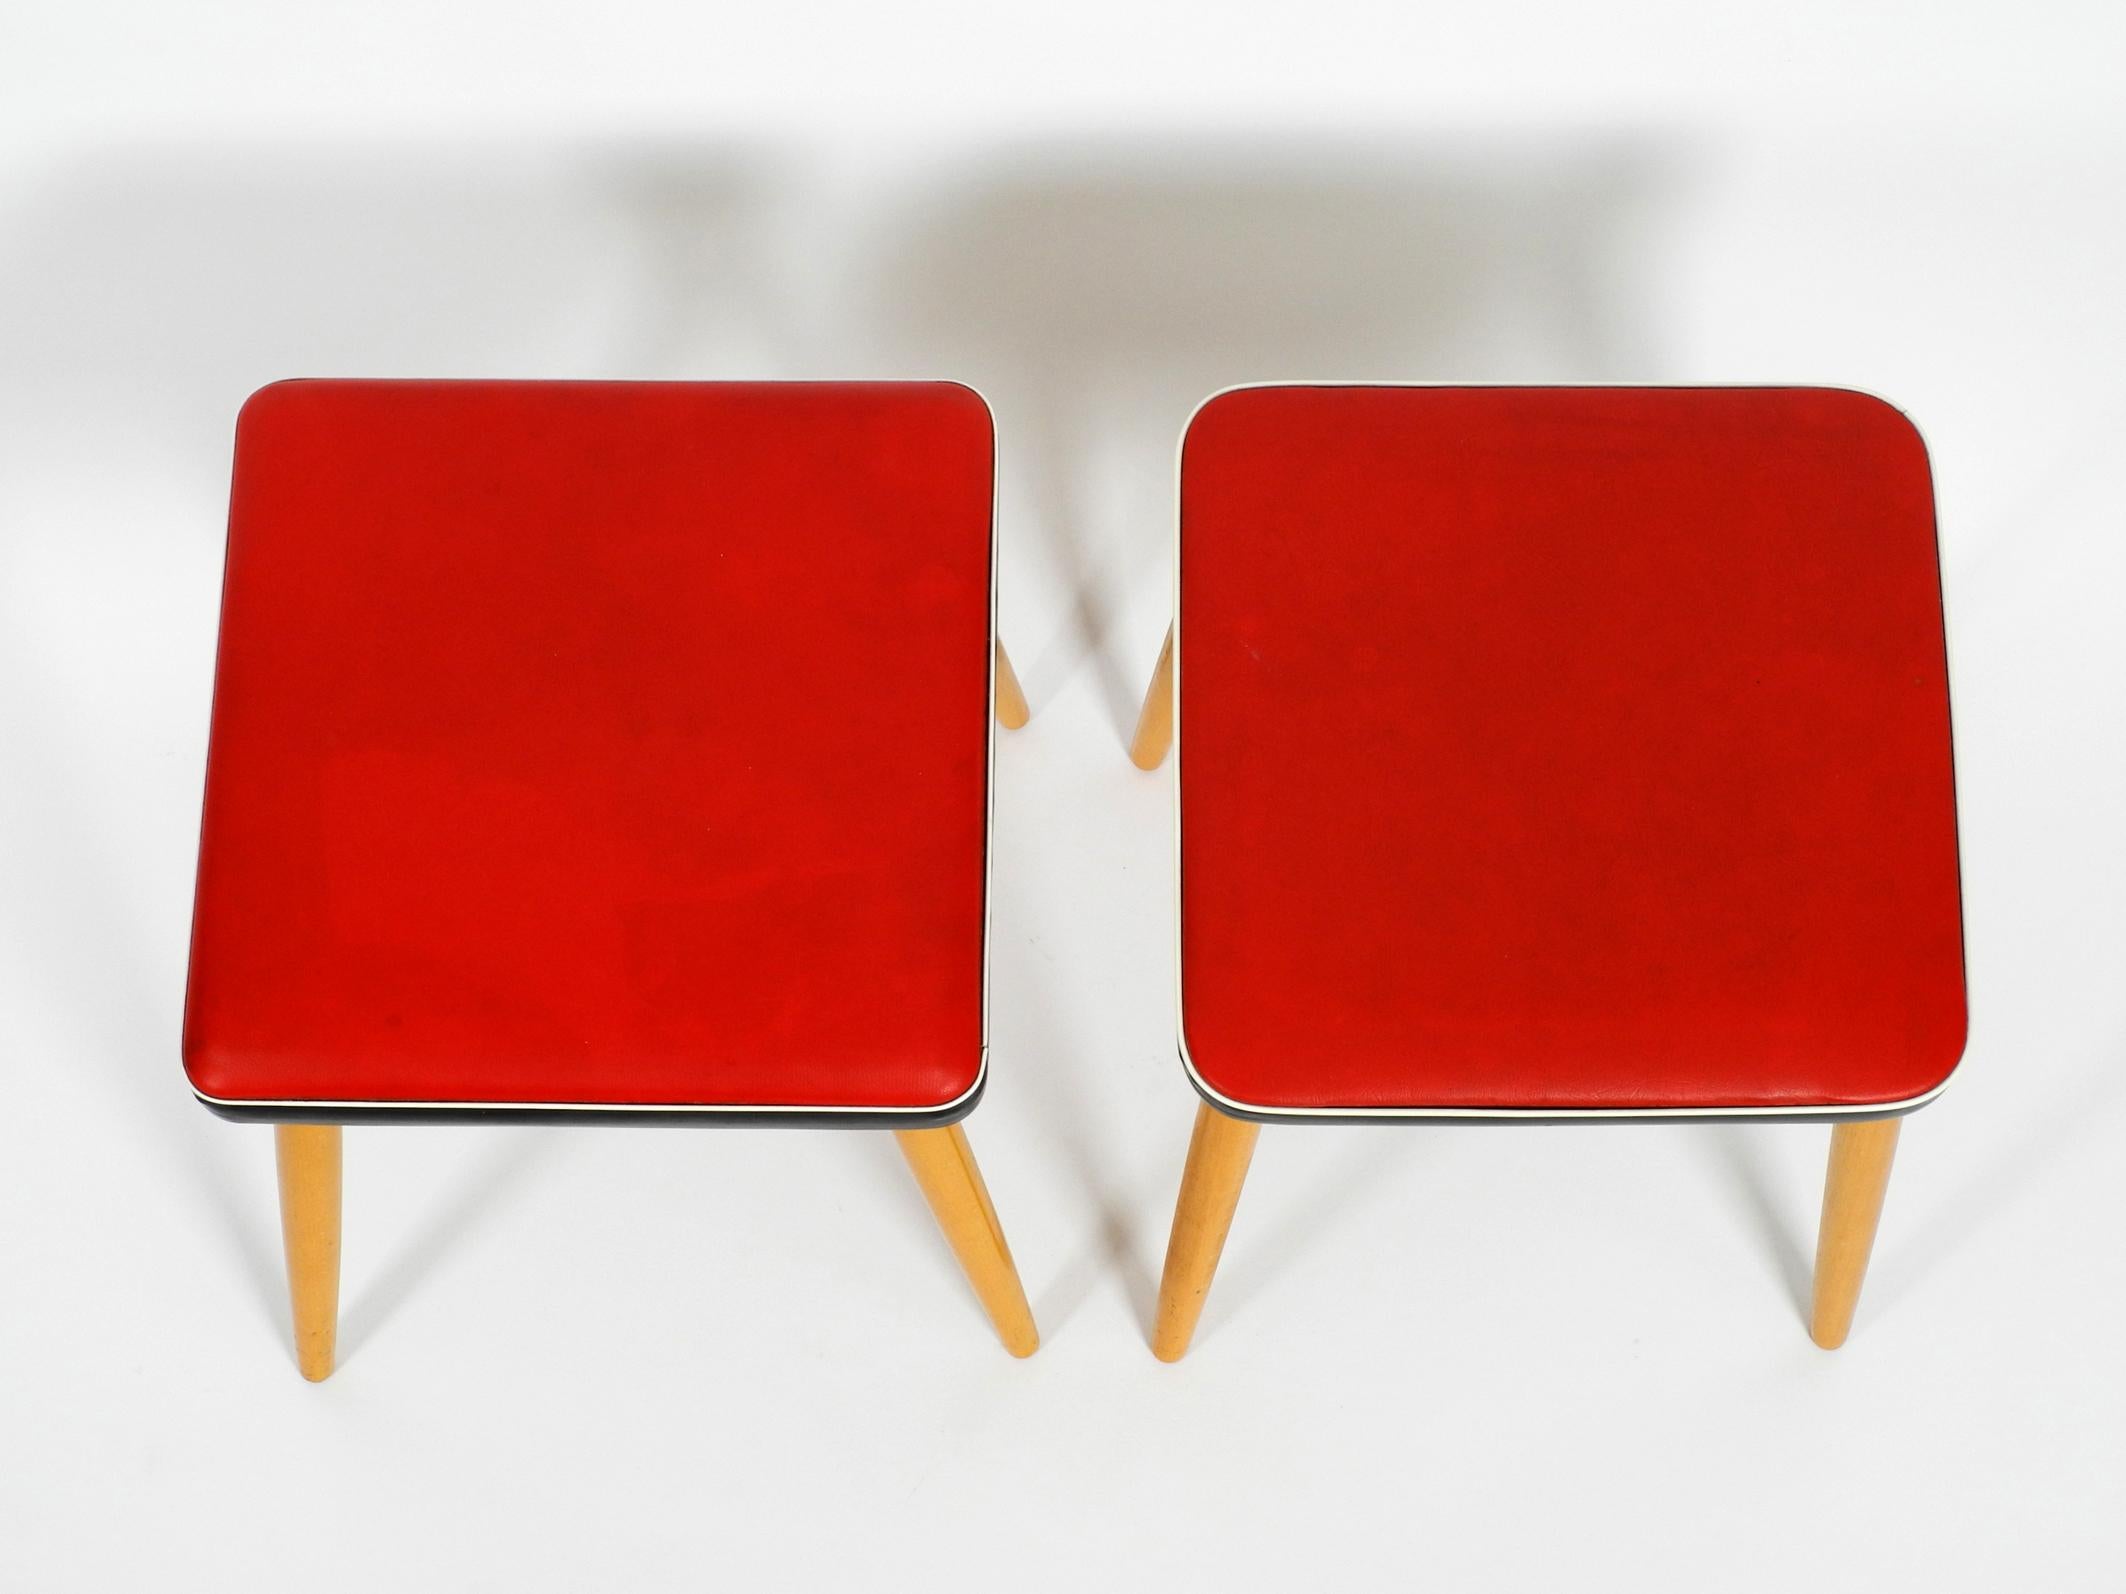 Pair of Almost Mint Midcentury Wooden Stools with Red Faux Leather Cover in Red 1